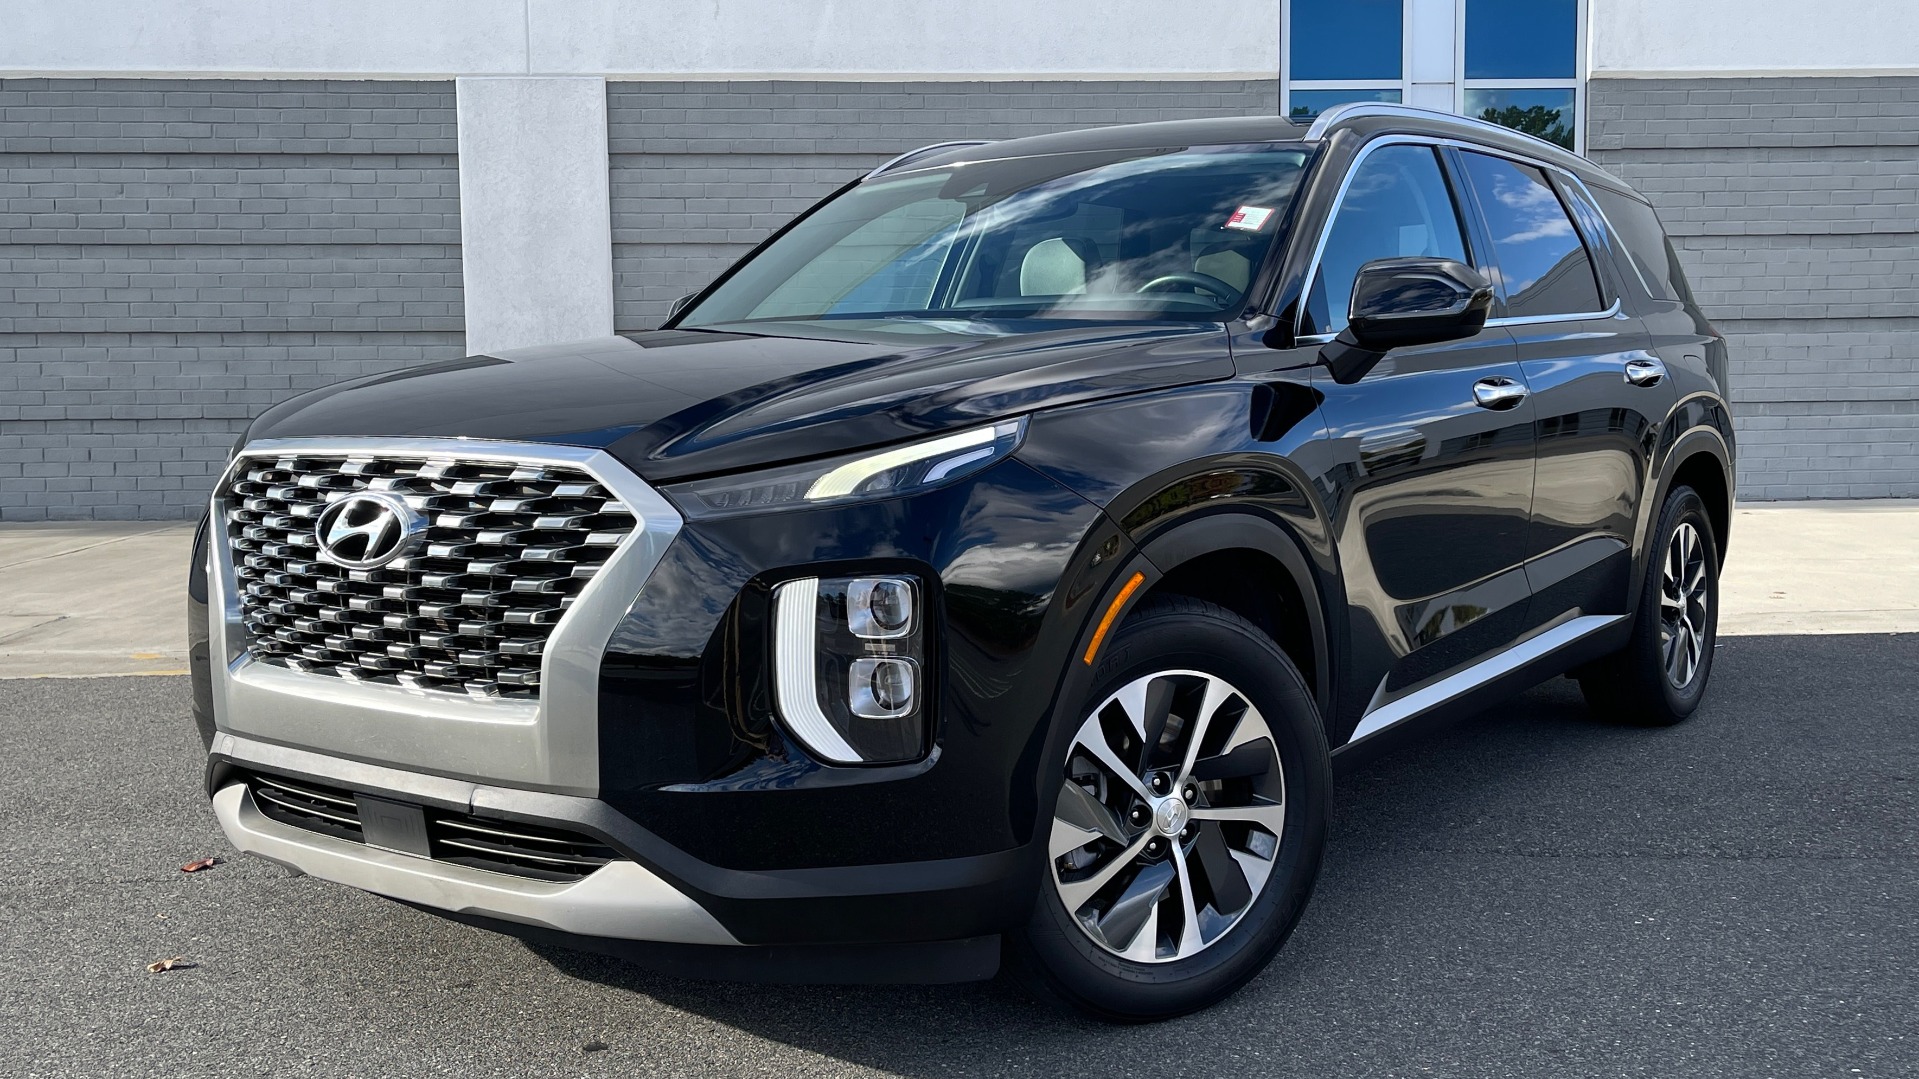 Used 2020 Hyundai PALISADE SEL / 3.8L V6 / FWD / 8-SPD AUTO / SUNROOF / 3-ROW / REARVIEW for sale Sold at Formula Imports in Charlotte NC 28227 1